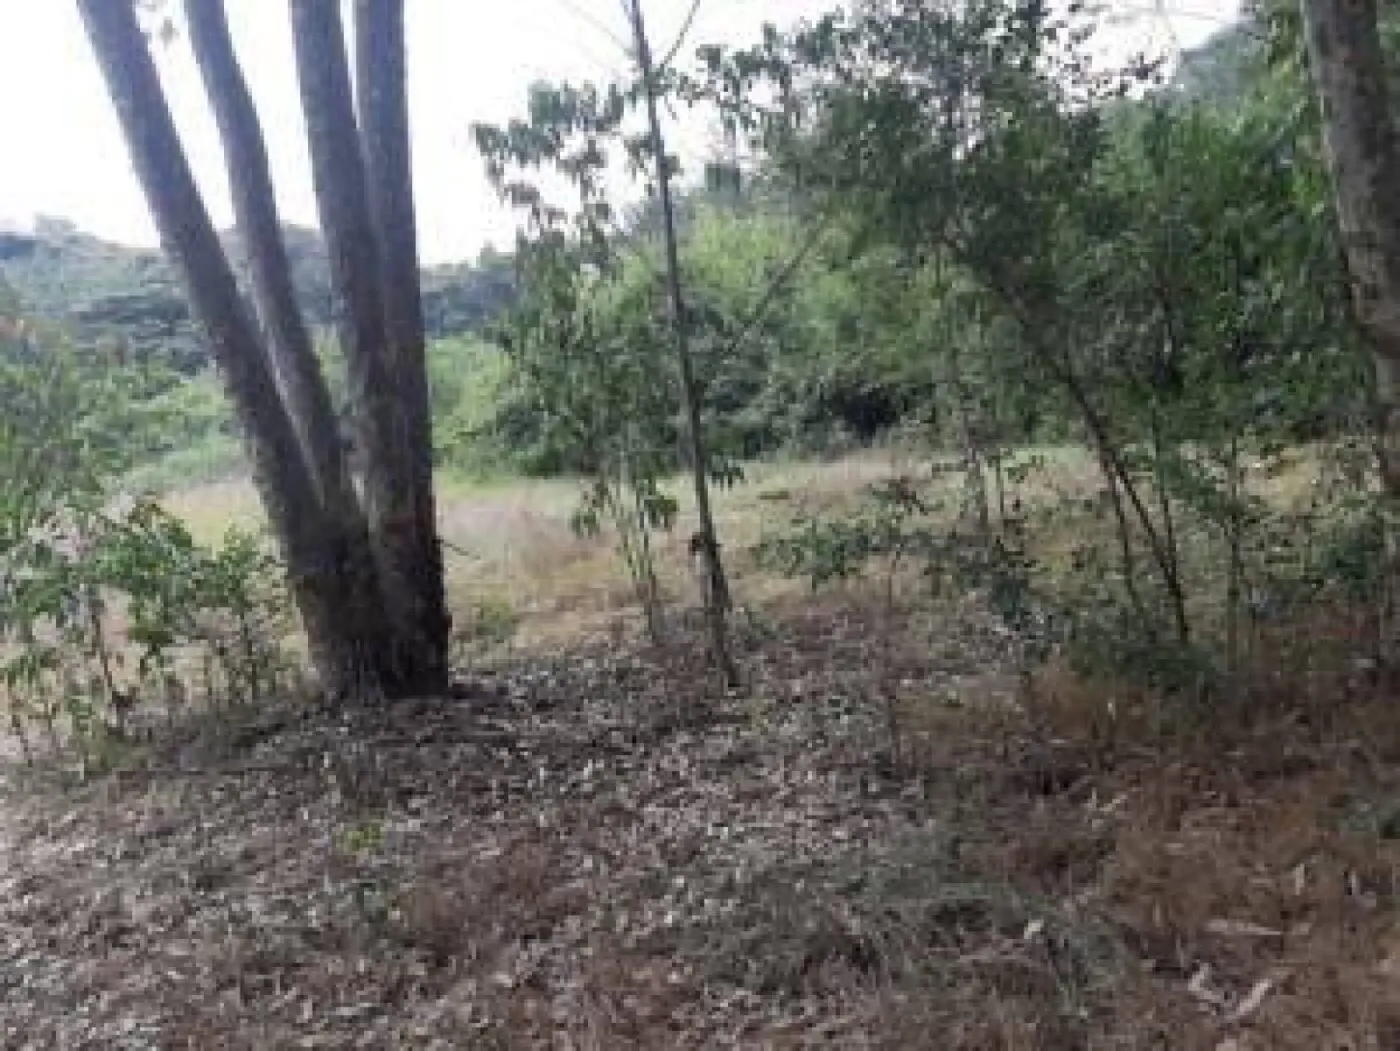 Land For Sale Real Estate-Land for sale in Karen Hardy 1/2 Acre @30M Ready Title Deed QUICK SALE Exclusive half acre 0.5🔥 10